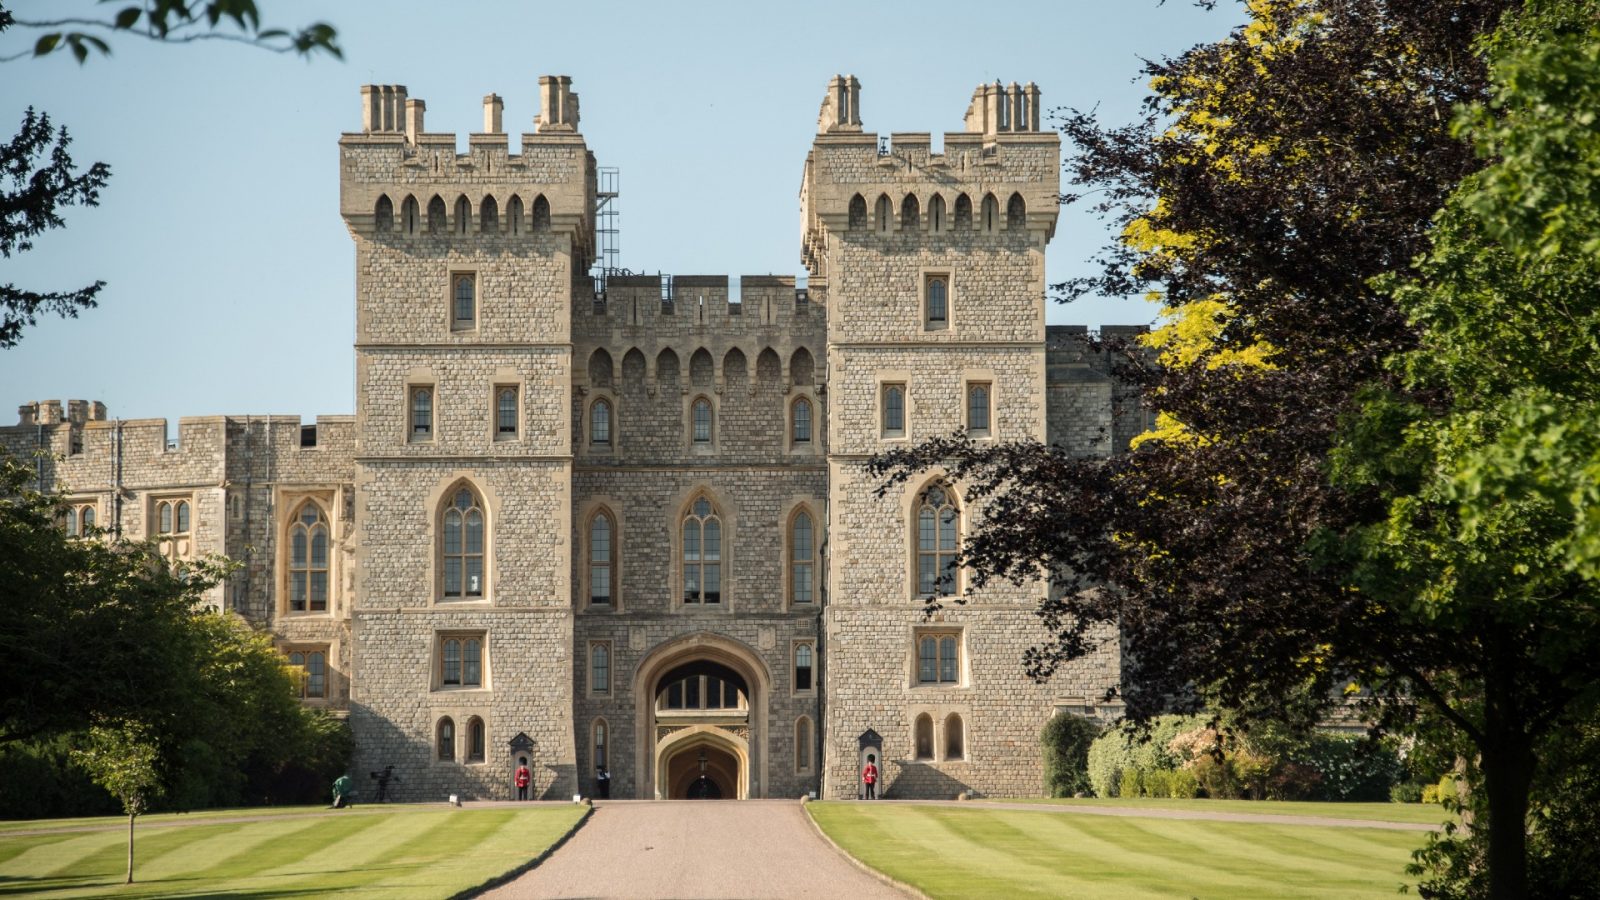 Even If You Don’t Know Much About Geography, Play This World Landmarks Quiz Anyway Windsor Castle, England